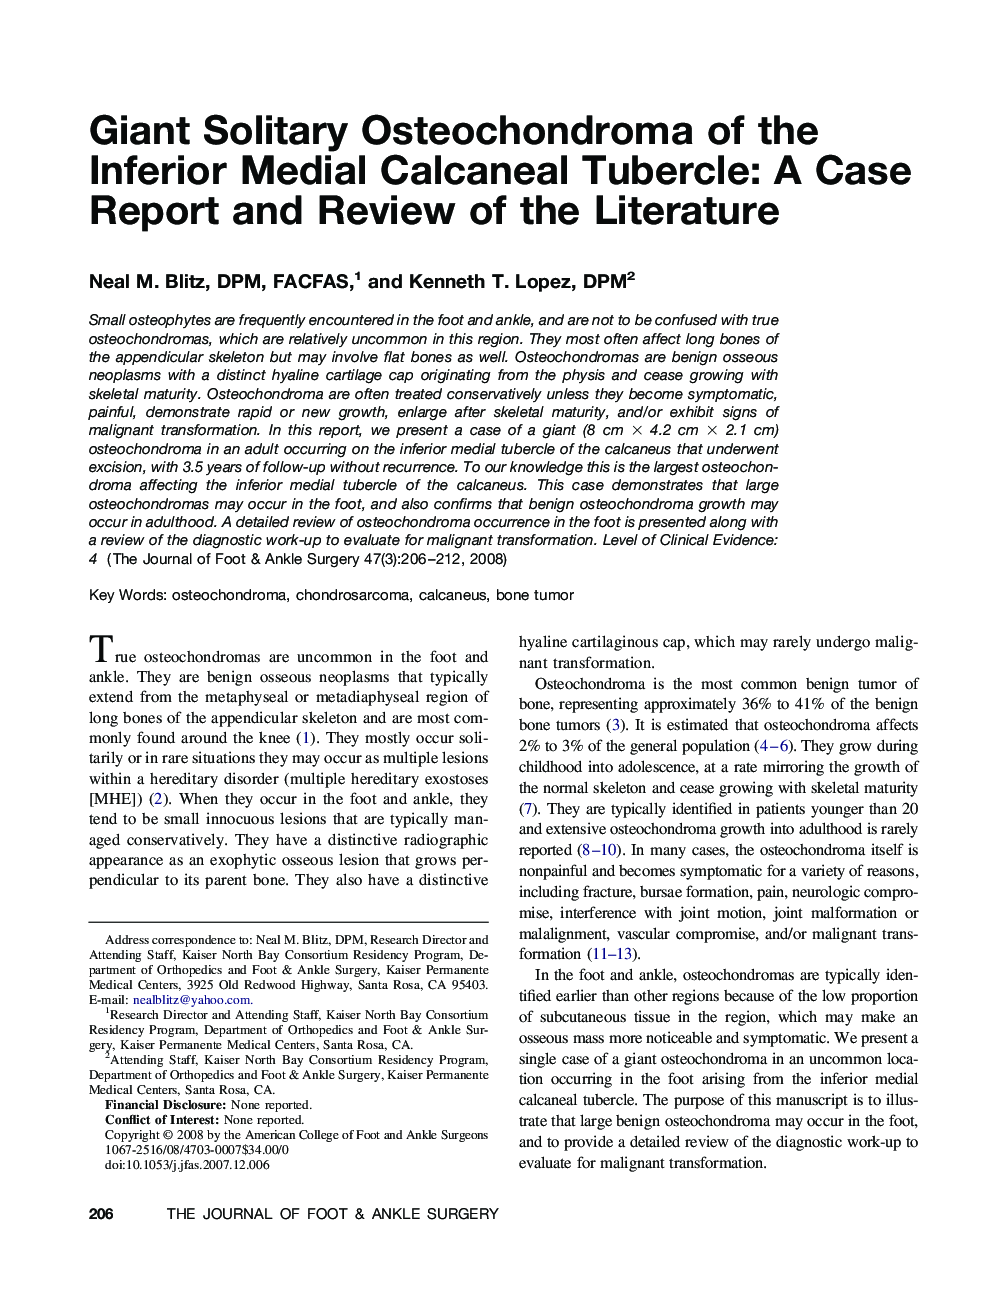 Giant Solitary Osteochondroma of the Inferior Medial Calcaneal Tubercle: A Case Report and Review of the Literature 